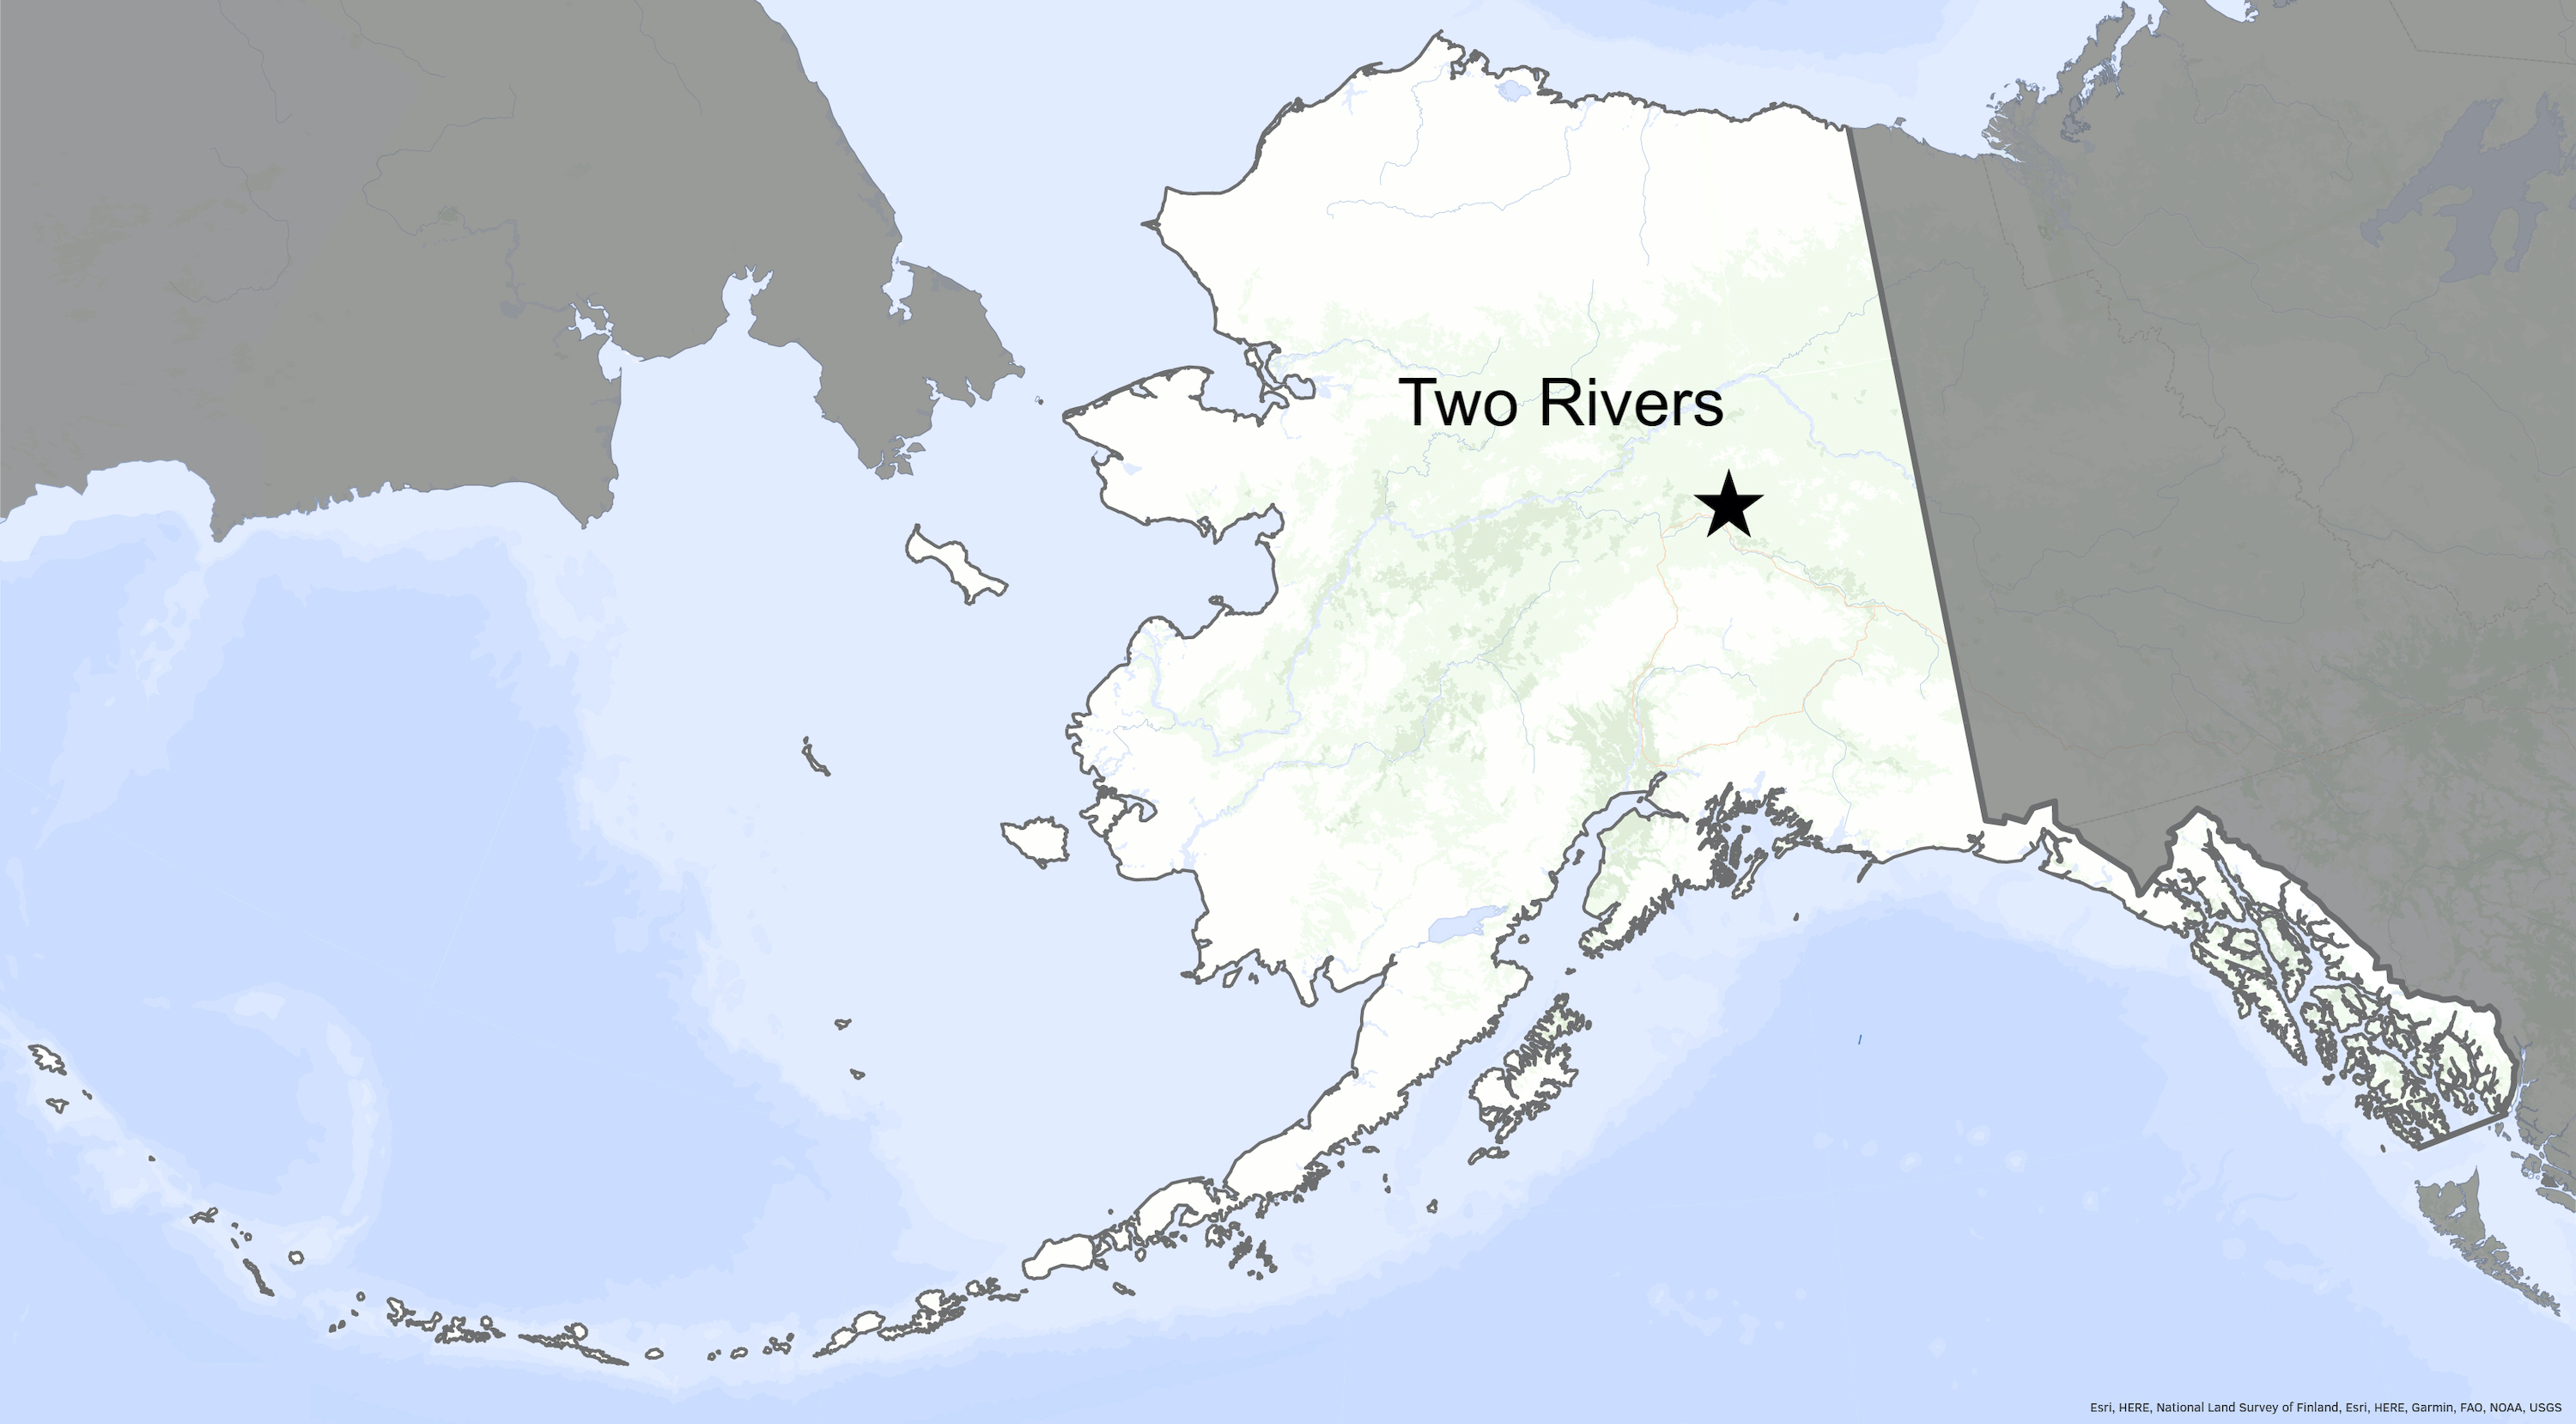 A star on a map locates Two Rivers in Alaska's interior.